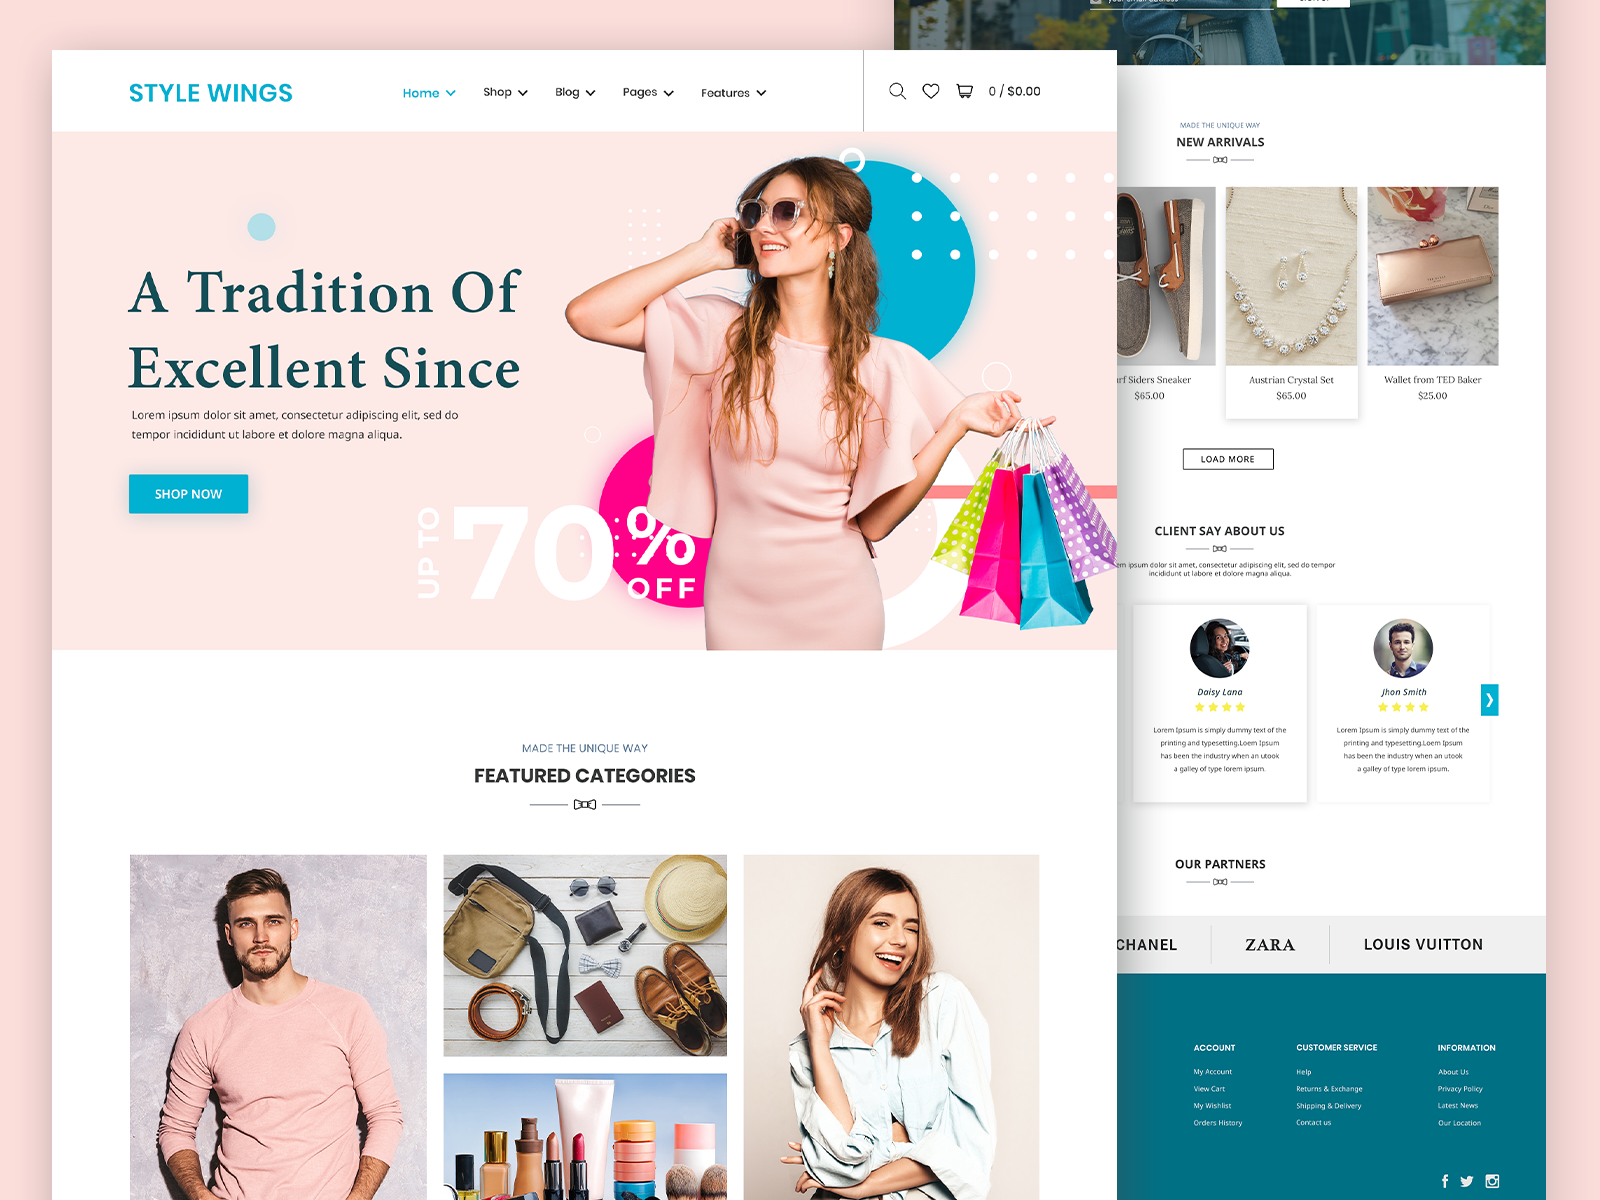 E-Commerce Landing Page Design by Muhsin Ahmed on Dribbble